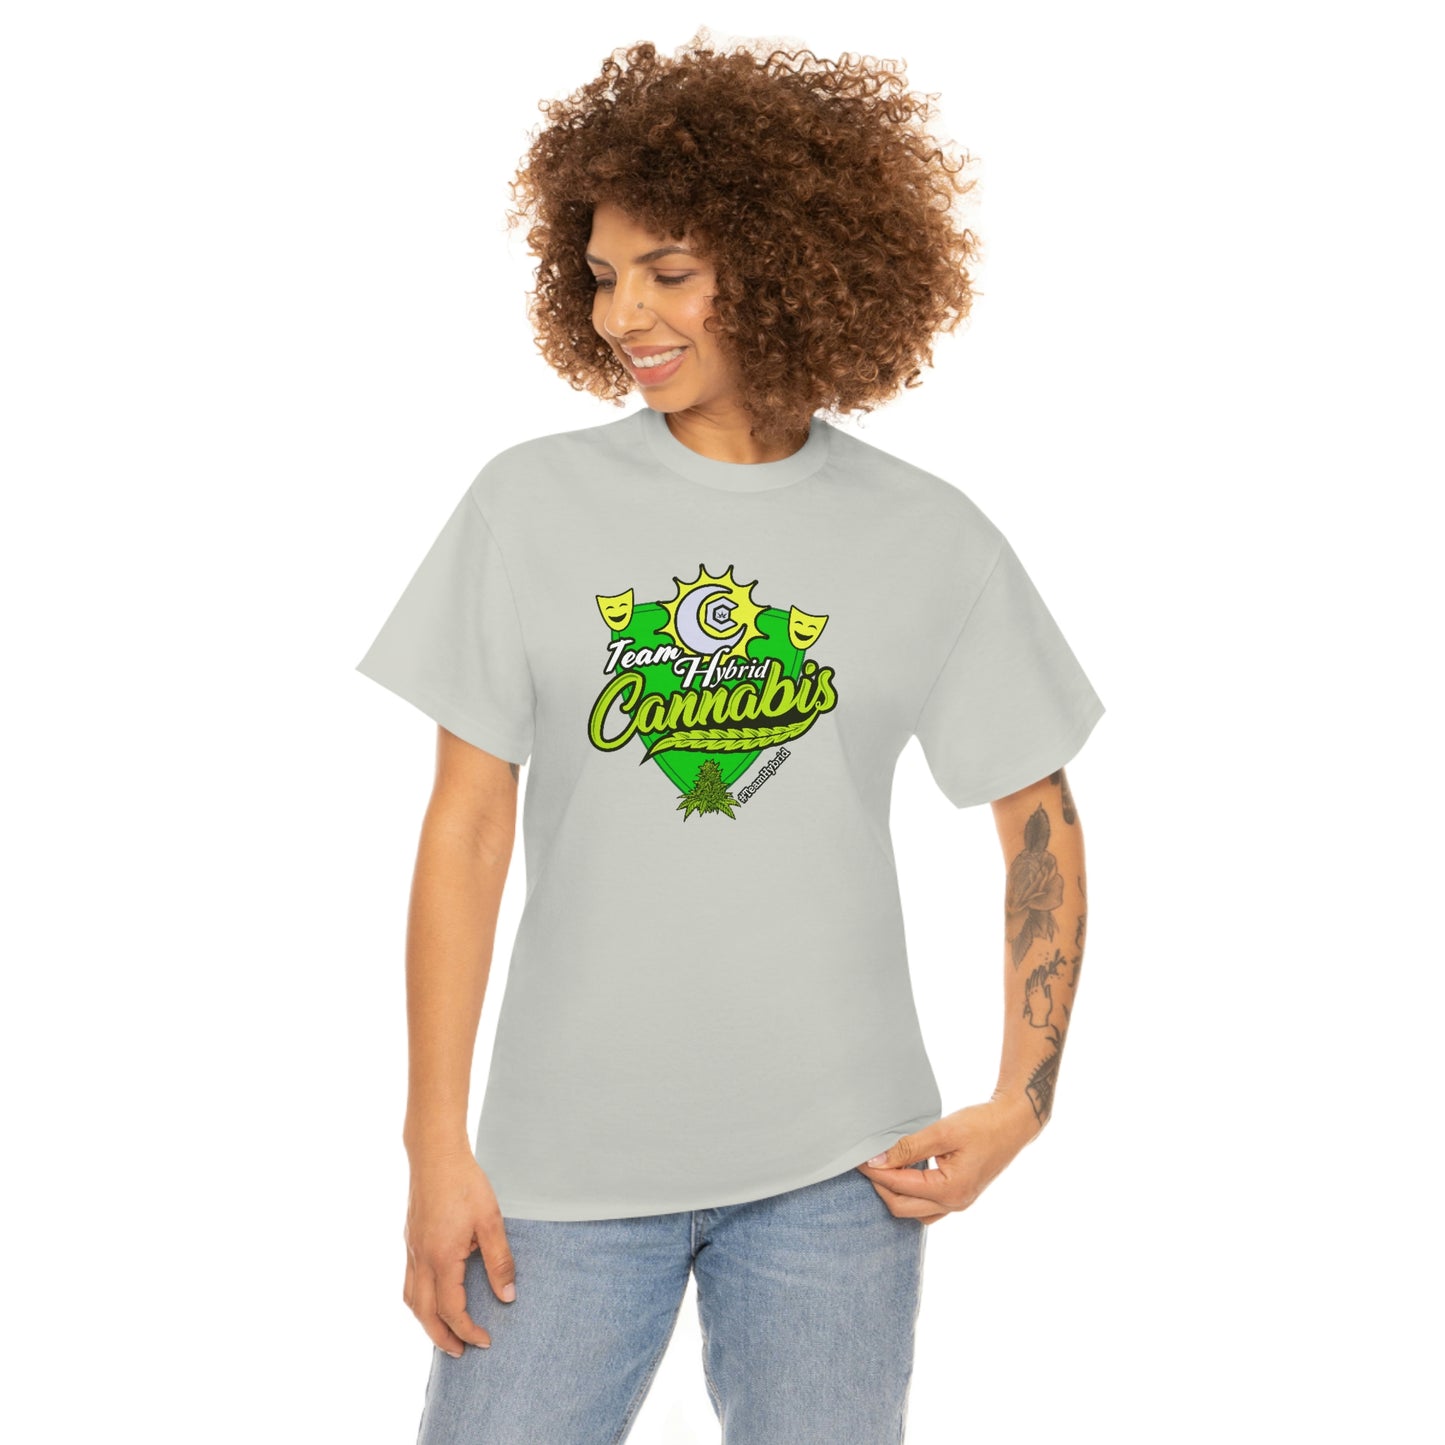 A woman wearing a Team Hybrid Cannabis T-Shirt with a green and yellow logo.